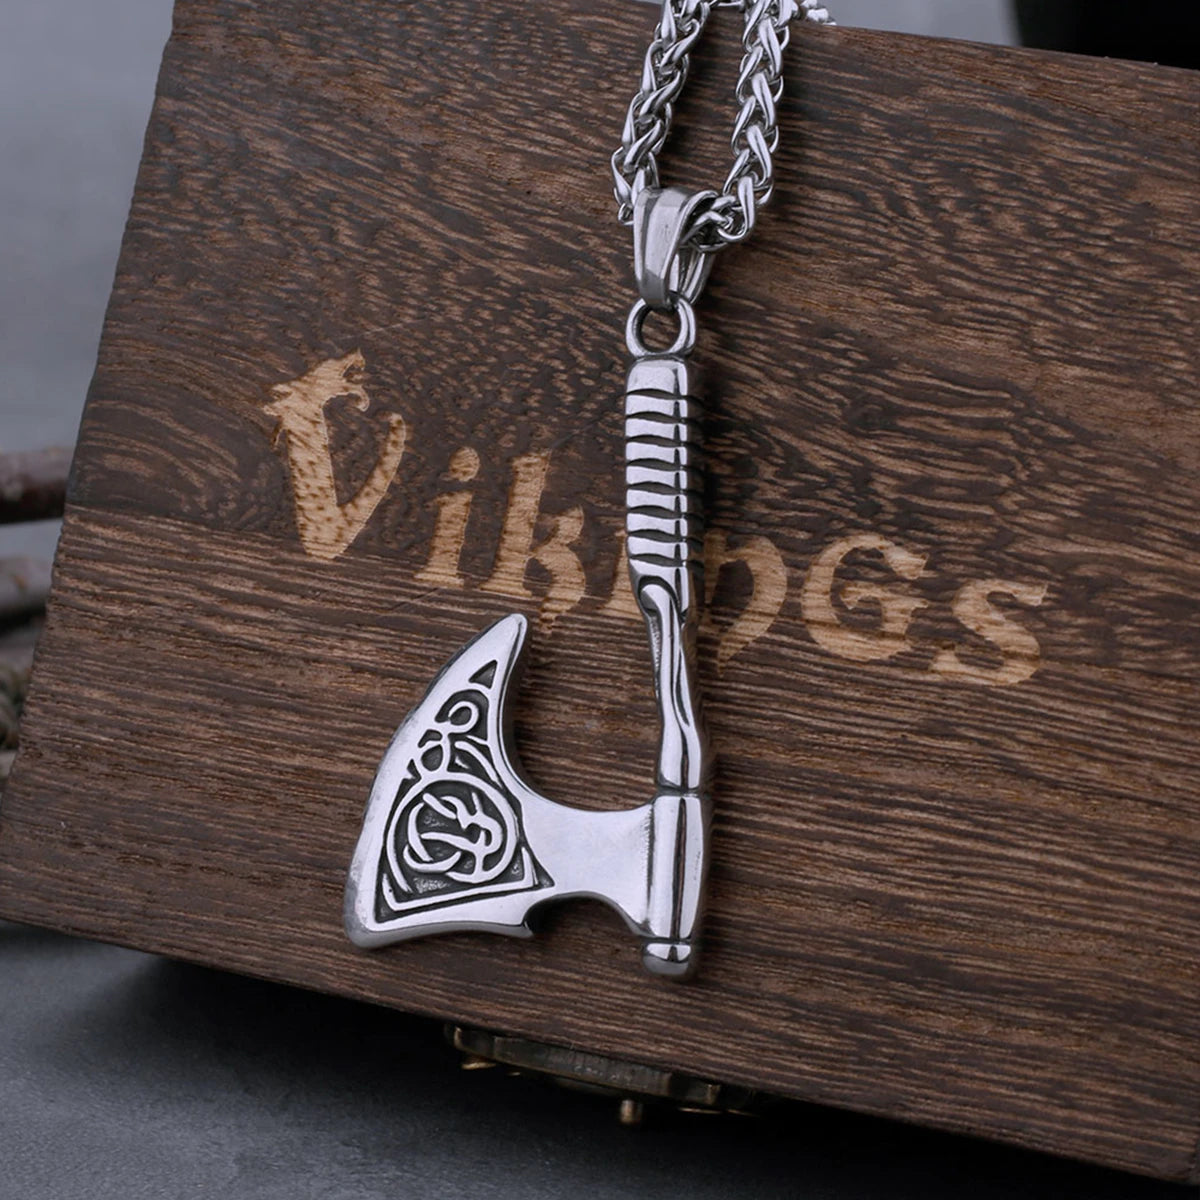 Stainless Steel Viking Axe Key Opener Necklace Men Fashion Charm Vintage High Quality Pendant Nordic